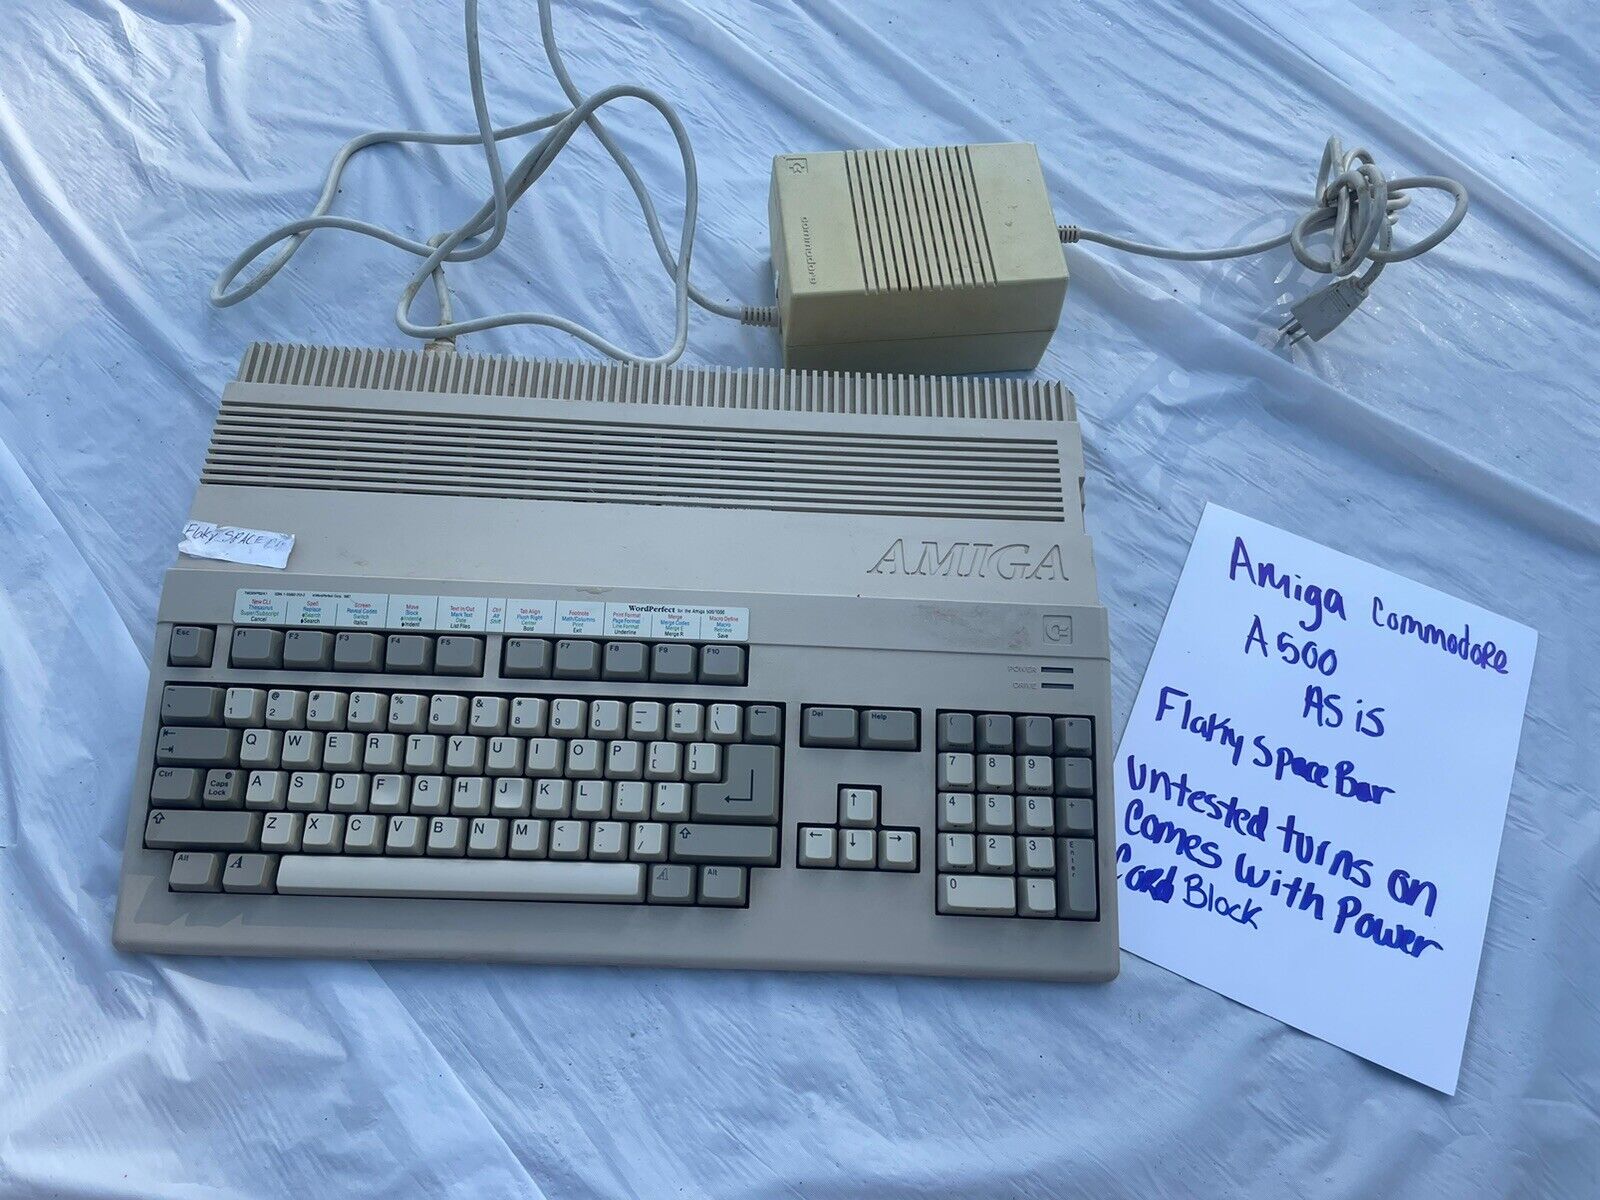 Vintage Commodore Amiga 500 Computer Keyboard Model A500 Sold As Is